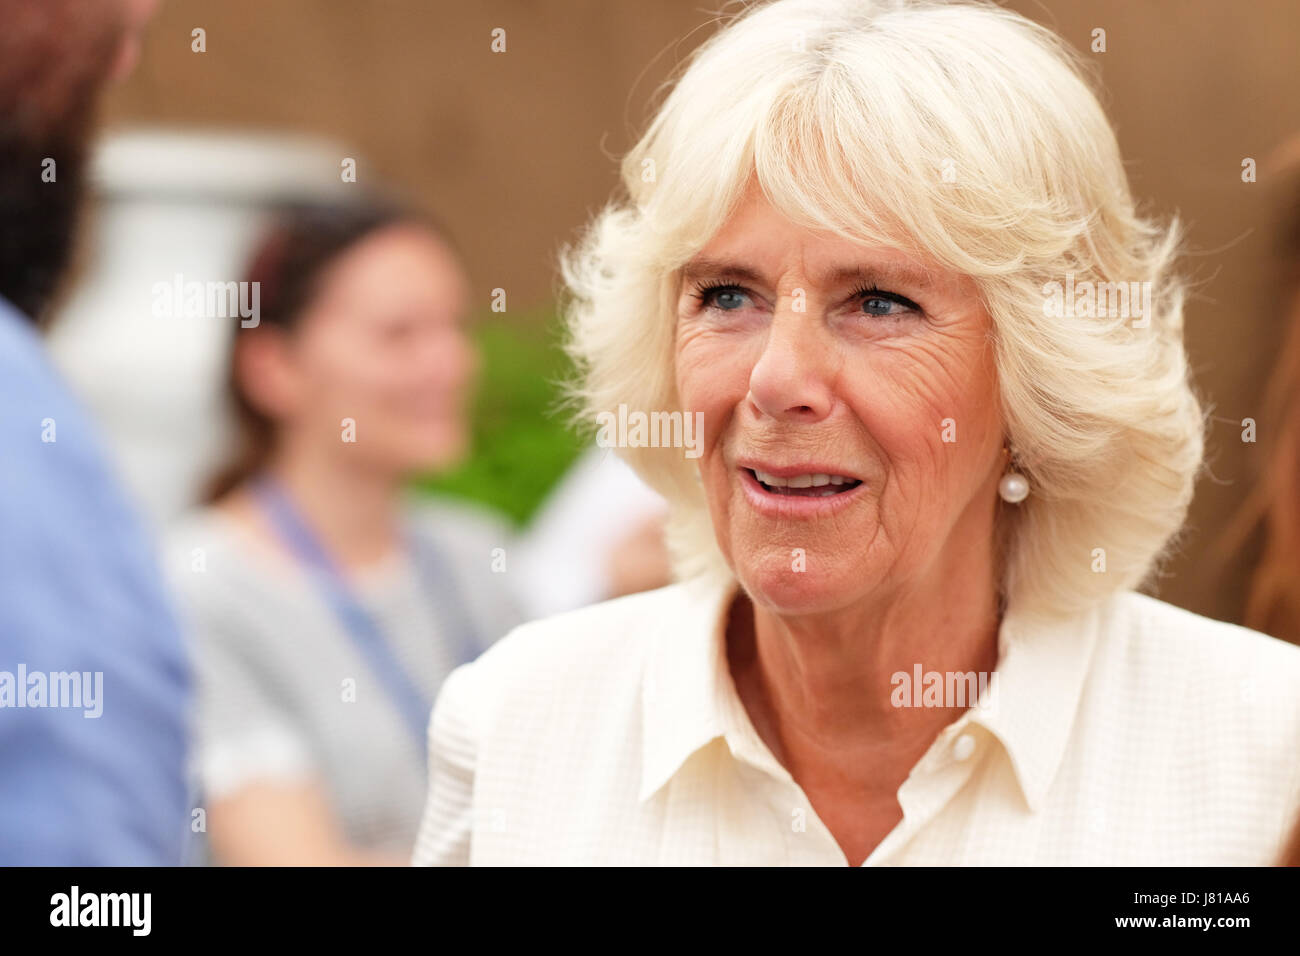 Hay Festival 2017 - Hay on Wye, Wales, UK - Friday 26th May 2017 - HRH Camilla Duchess of Cornwall arrives at the Hay Festival  - the Hay Festival celebrates its 30th anniversary in 2017 - Steven May / Alamy Live News Stock Photo